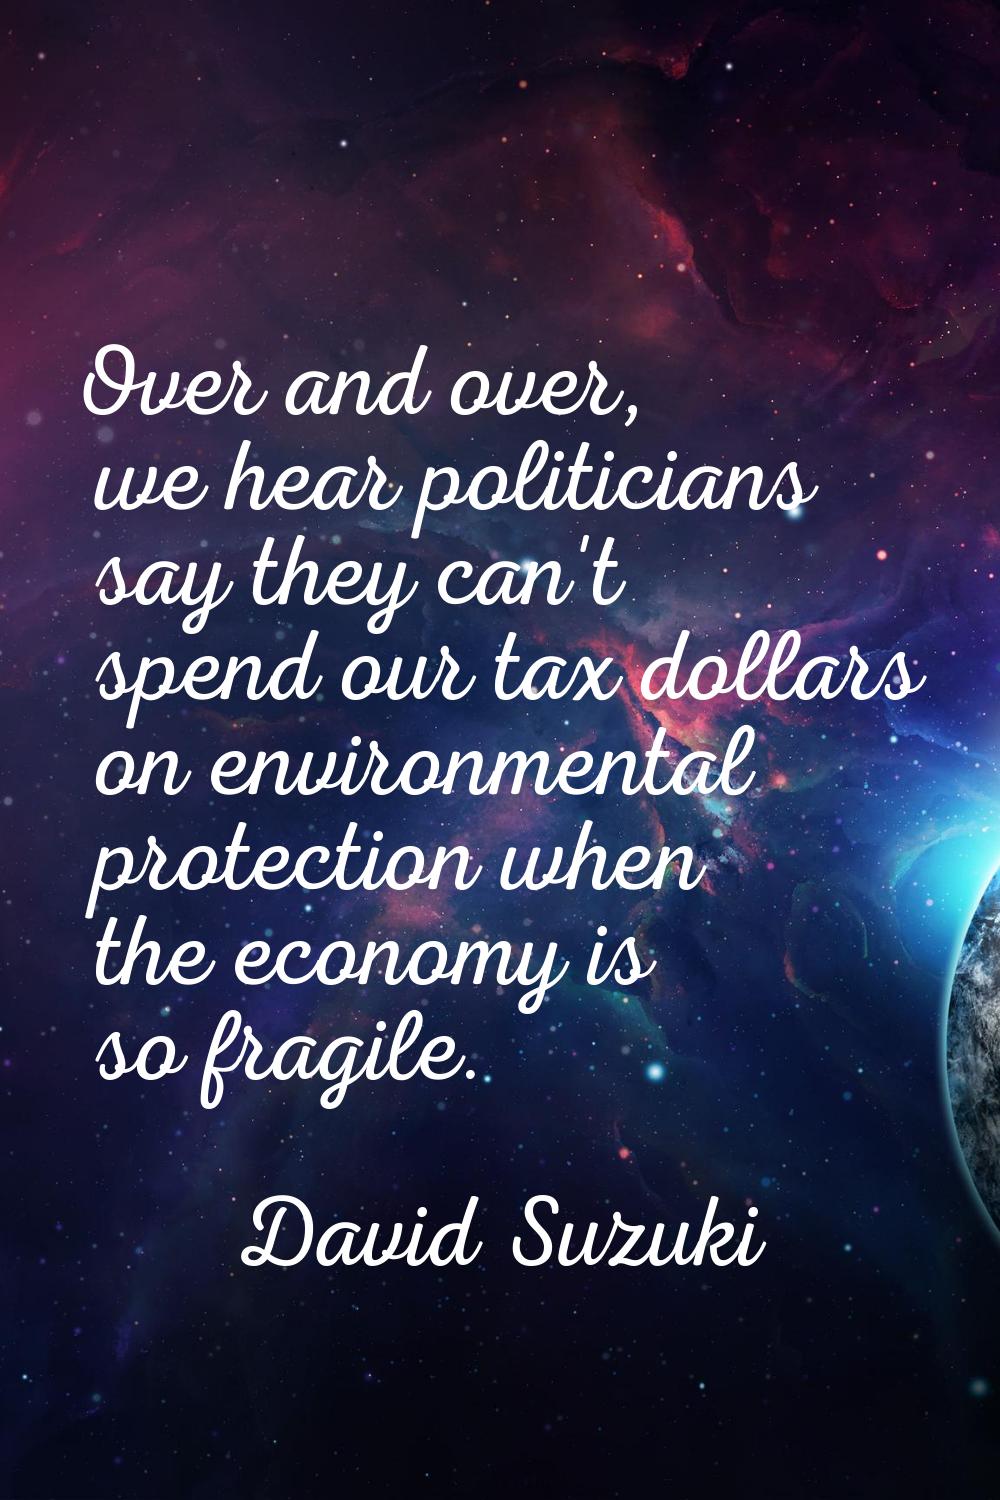 Over and over, we hear politicians say they can't spend our tax dollars on environmental protection